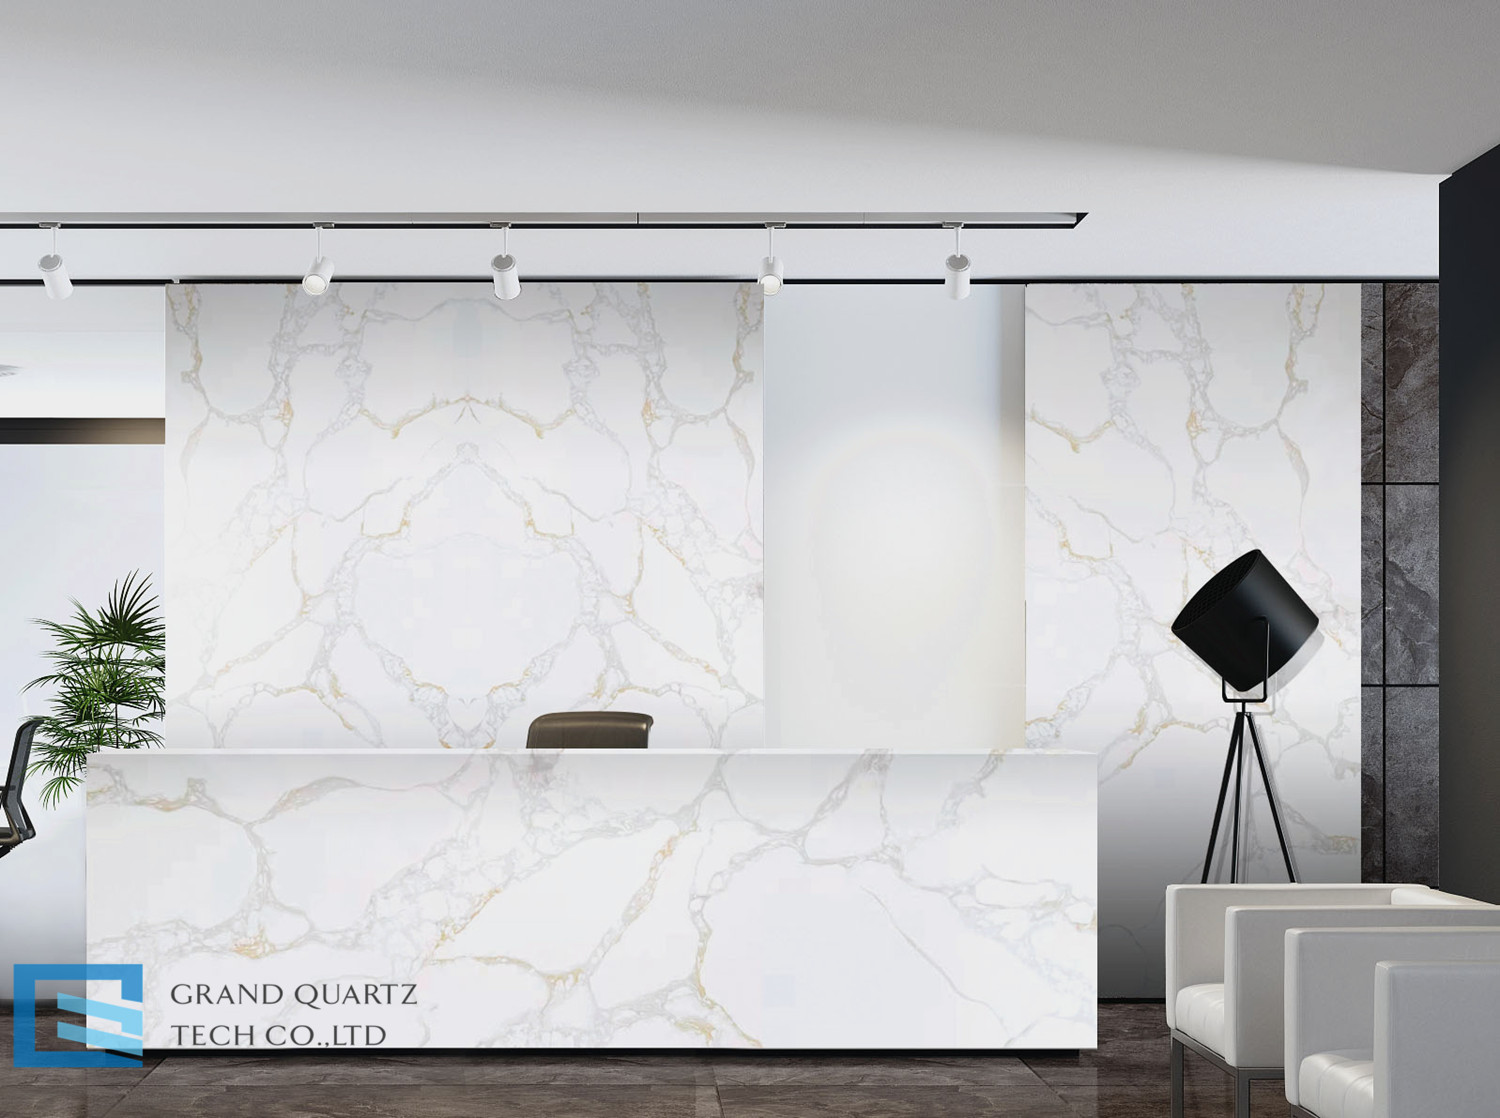 GQ-T205 calacatta white quartz with gold and grey veins for countertop.jpg